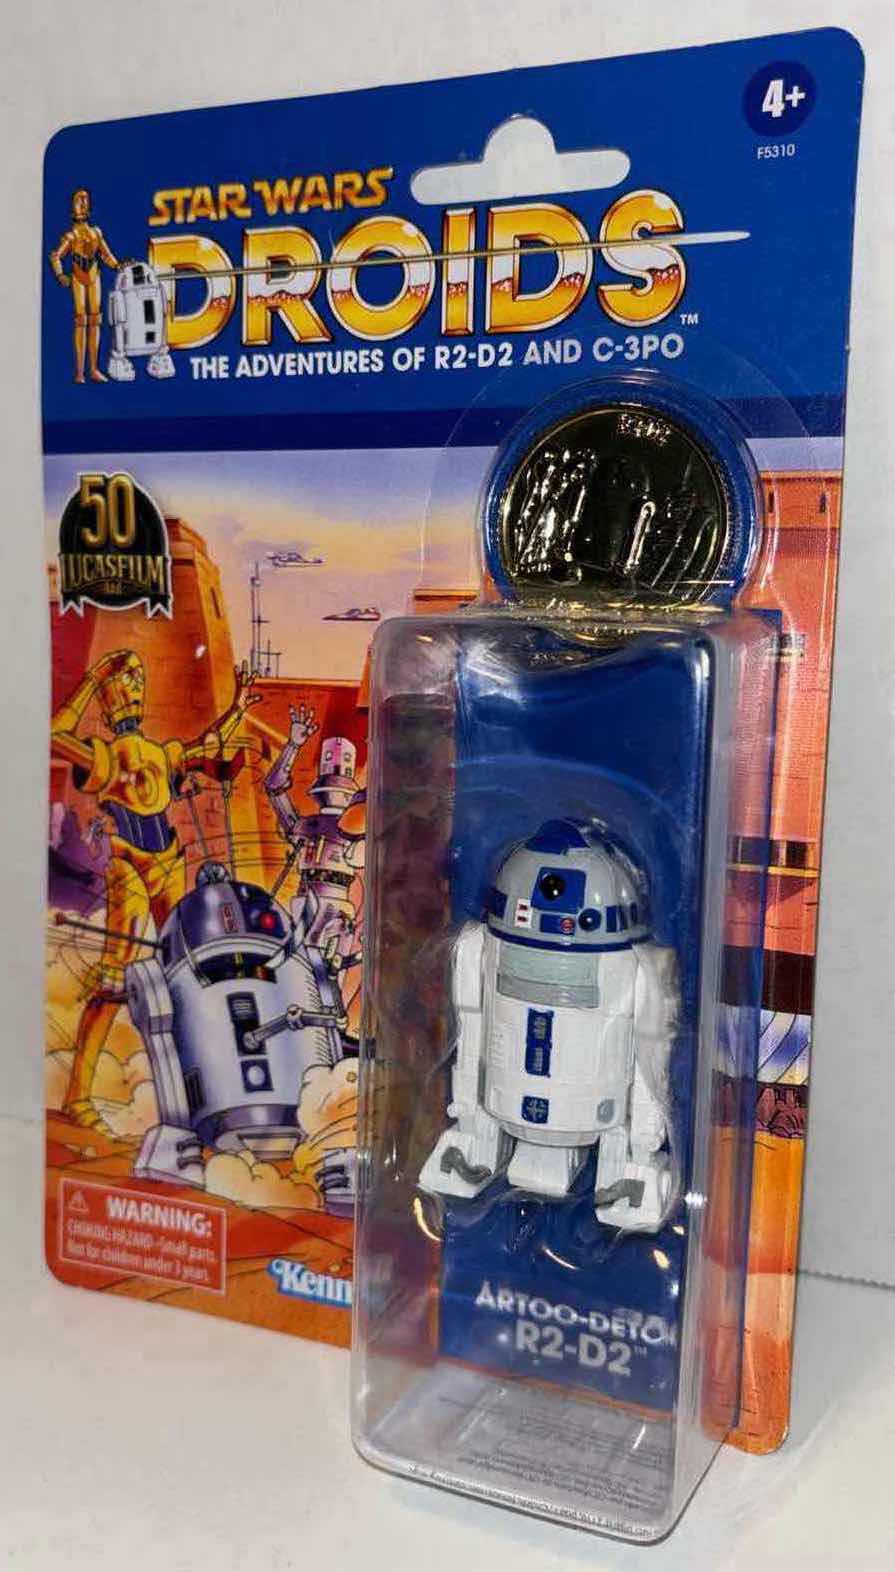 Photo 1 of NEW 2021 HASBRO KENNER 50TH ANNIVERSARY LUCAS FILM STAR WARS DROIDS THE ADVENTURE OF R2-D2 & C-3PO, “ARTOO-DETOO R2-D2” W COIN